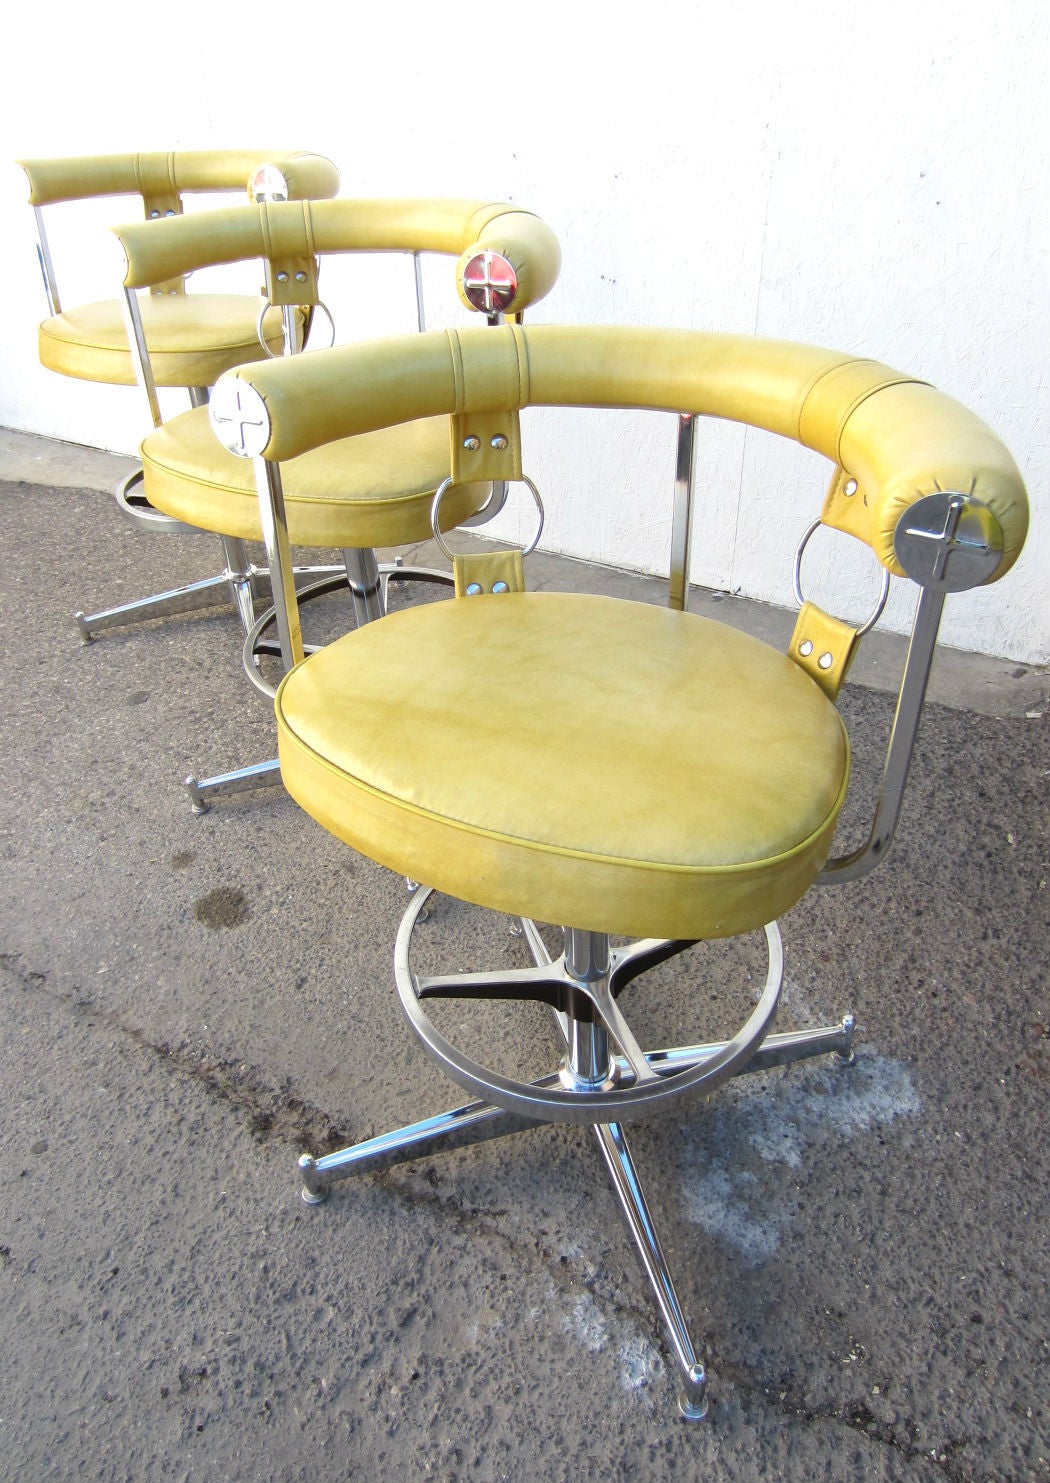 Tommi Parzinger style design bar stools with straps and rings in chrome and yellow vinyl by Daystrom Furniture of Boston. Each swivel with adjustable foot rest height. 
Each is dated April 13, 1978 on bottoms